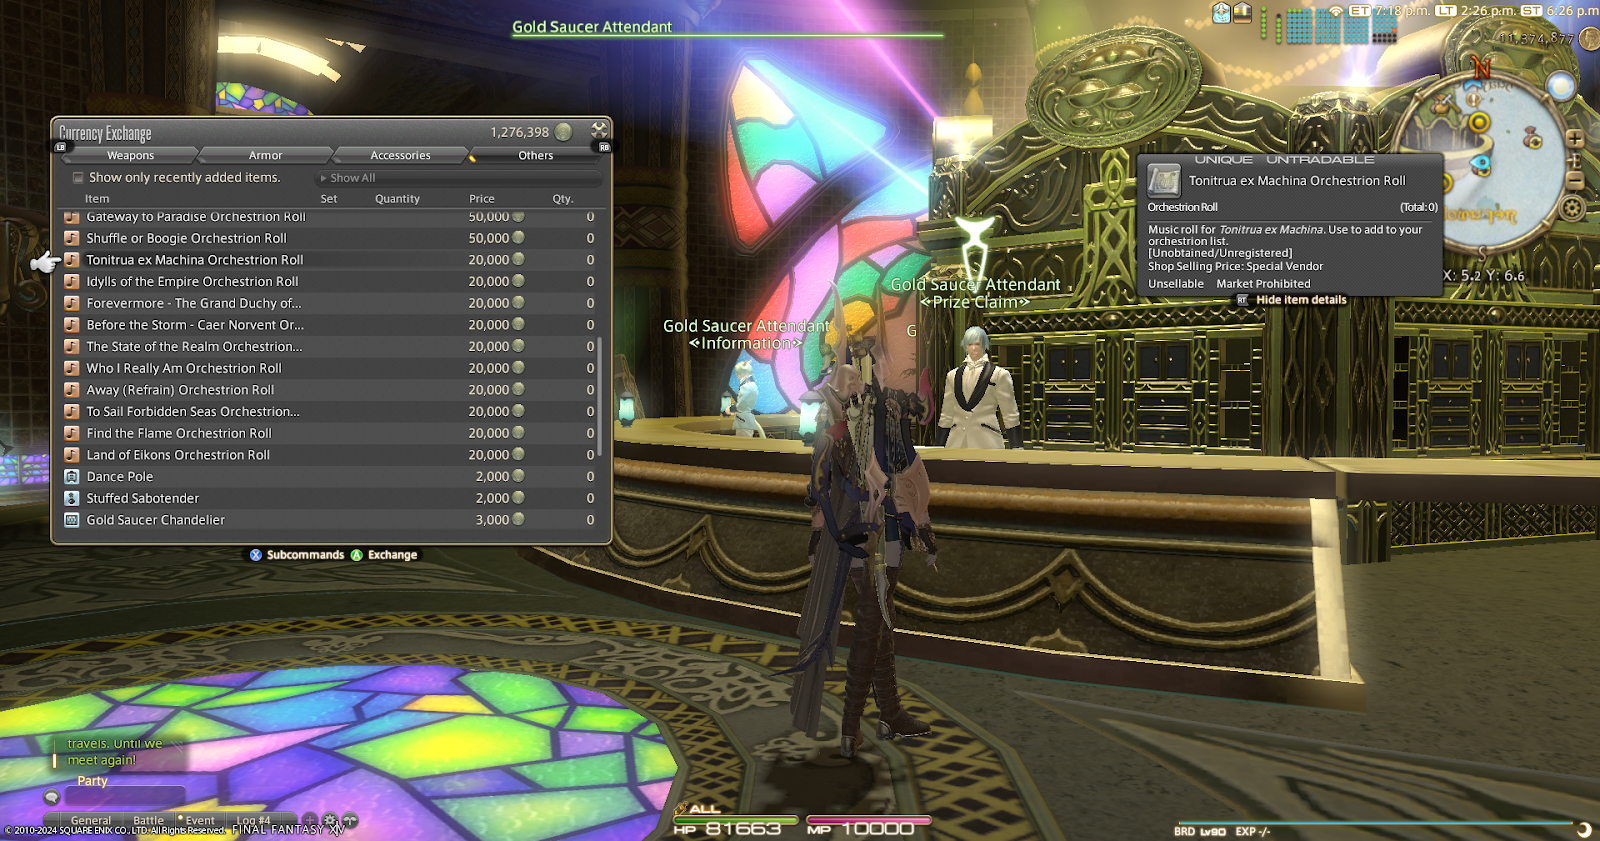 A player character browses a casino vendor's inventory in Final Fantasy XIV.